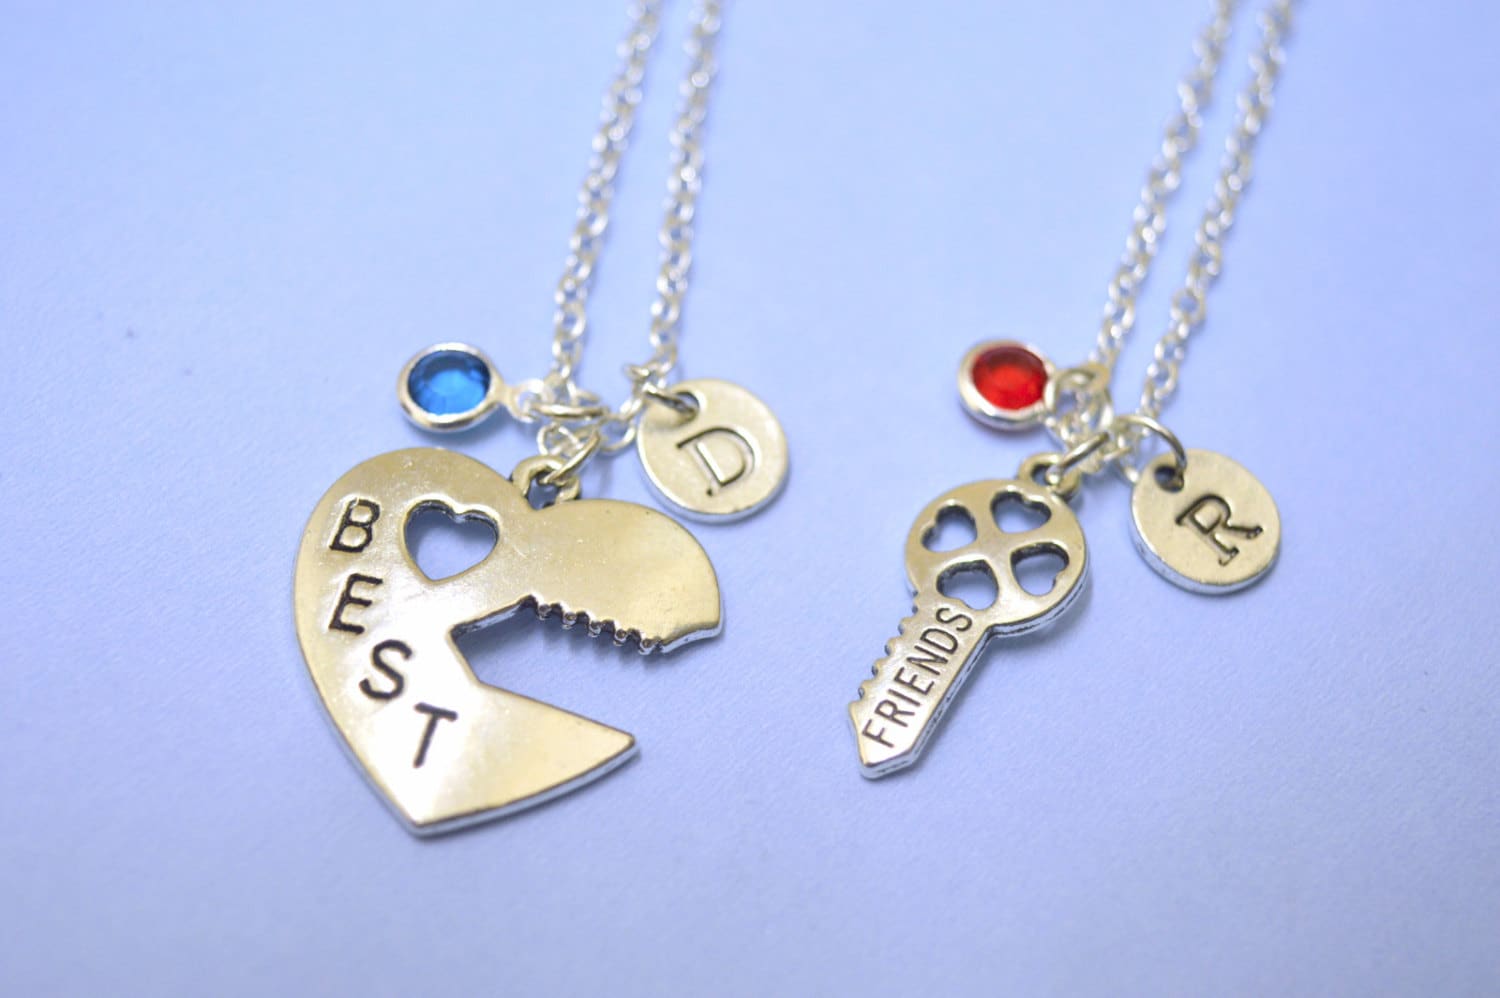 Lock and Key Necklaces, His and Hers Couple or Best Friend Pair of Necklaces, Silver Heart Shaped Lock and Key, Monogram Initials